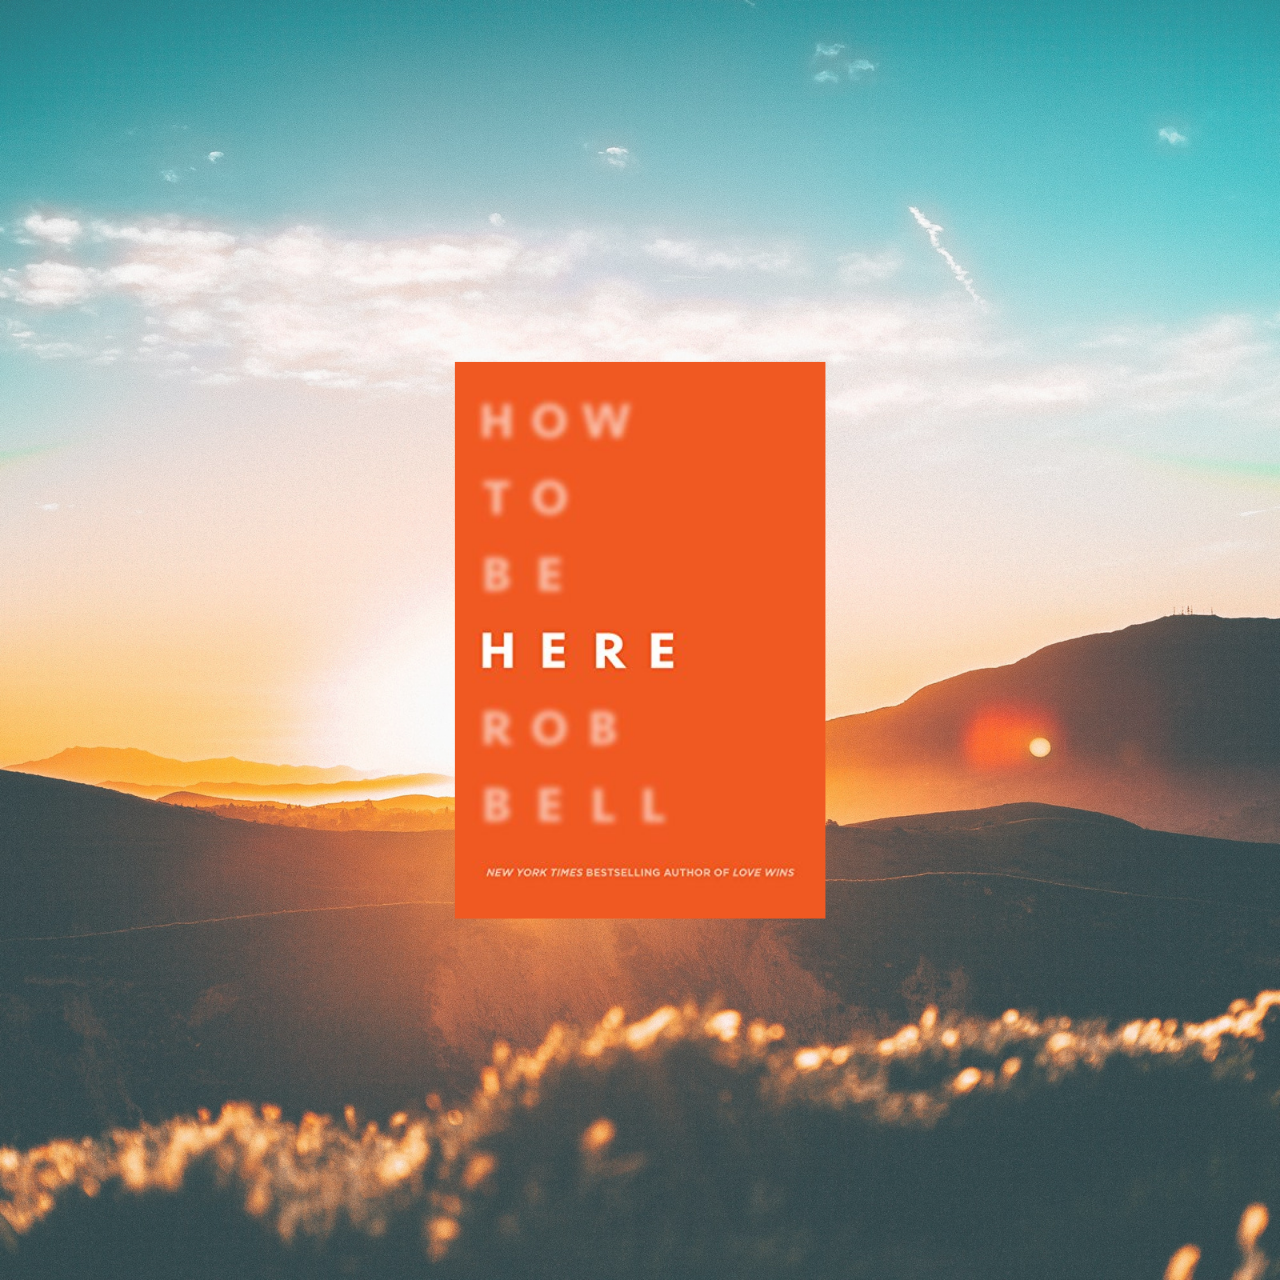 How to be Here by Rob Bell Quotes & Review